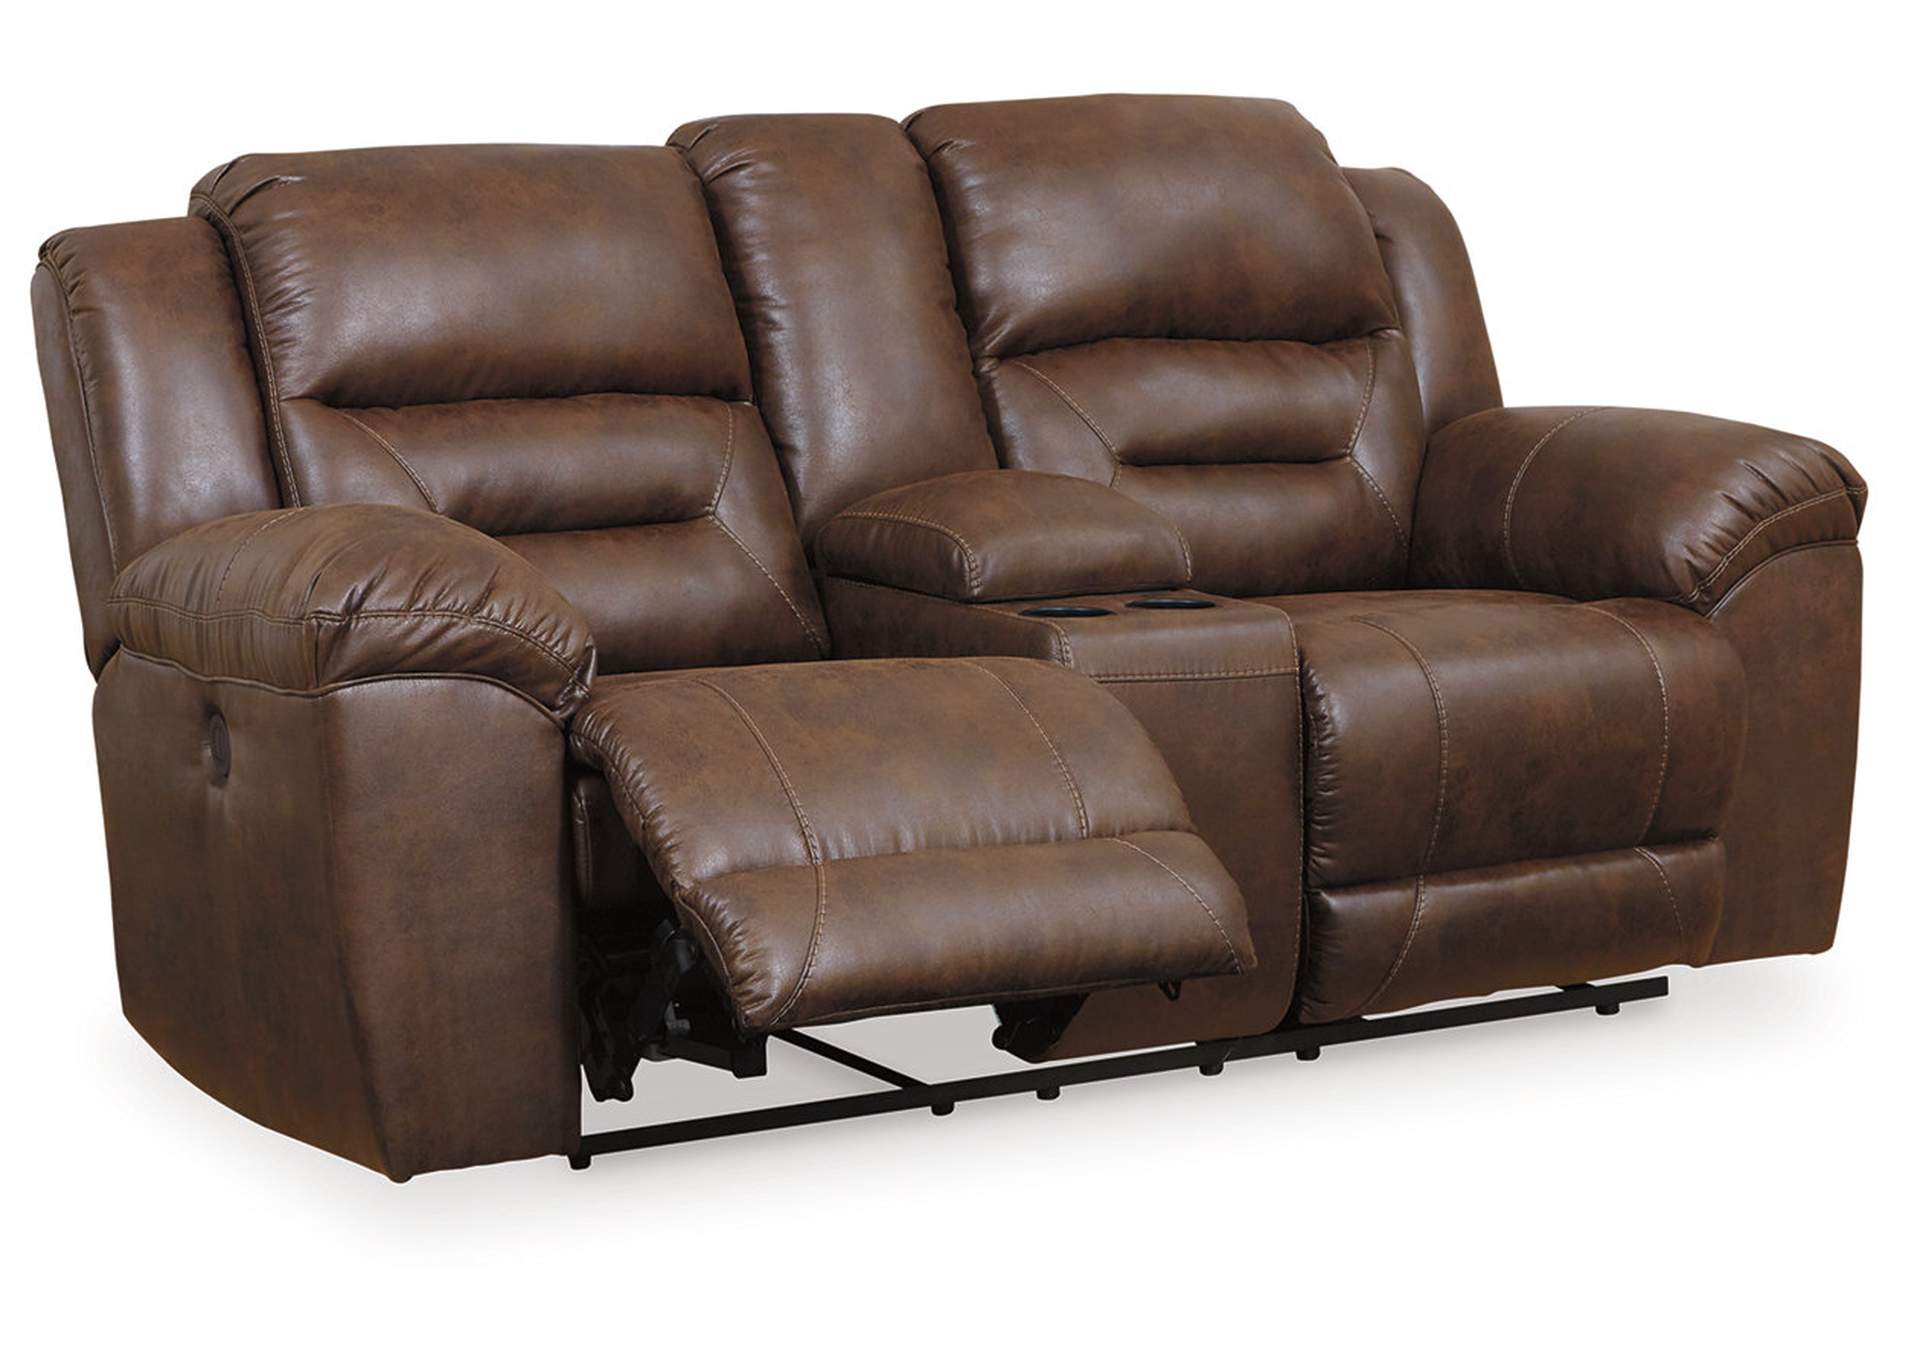 Stoneland Power Reclining Loveseat with Console,Signature Design By Ashley